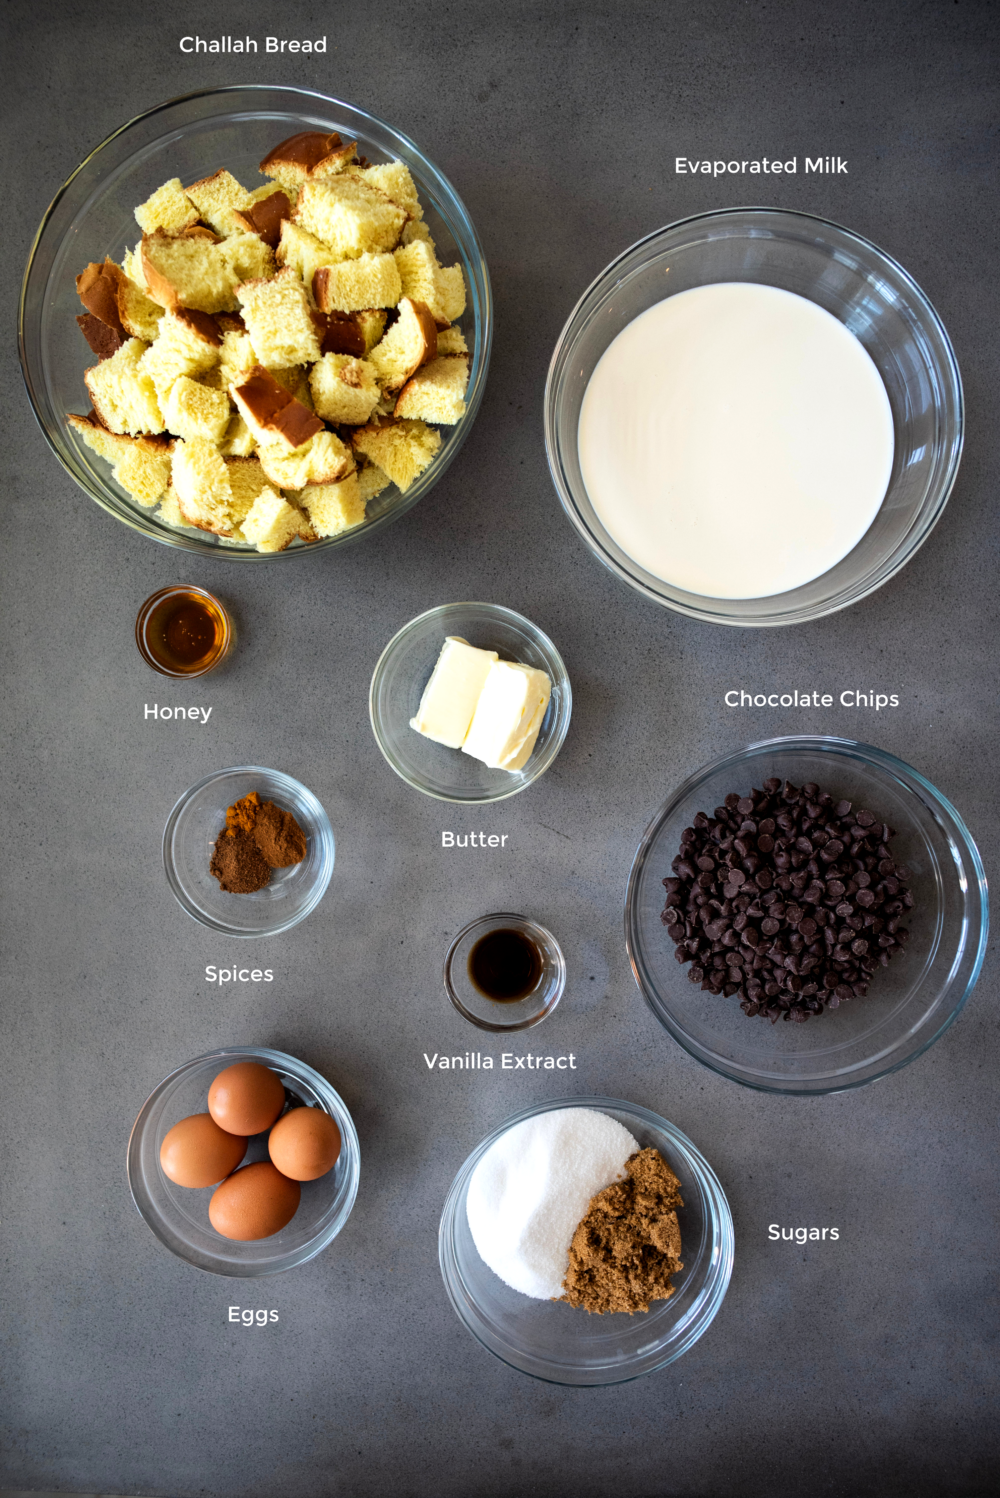 bread pudding ingredients